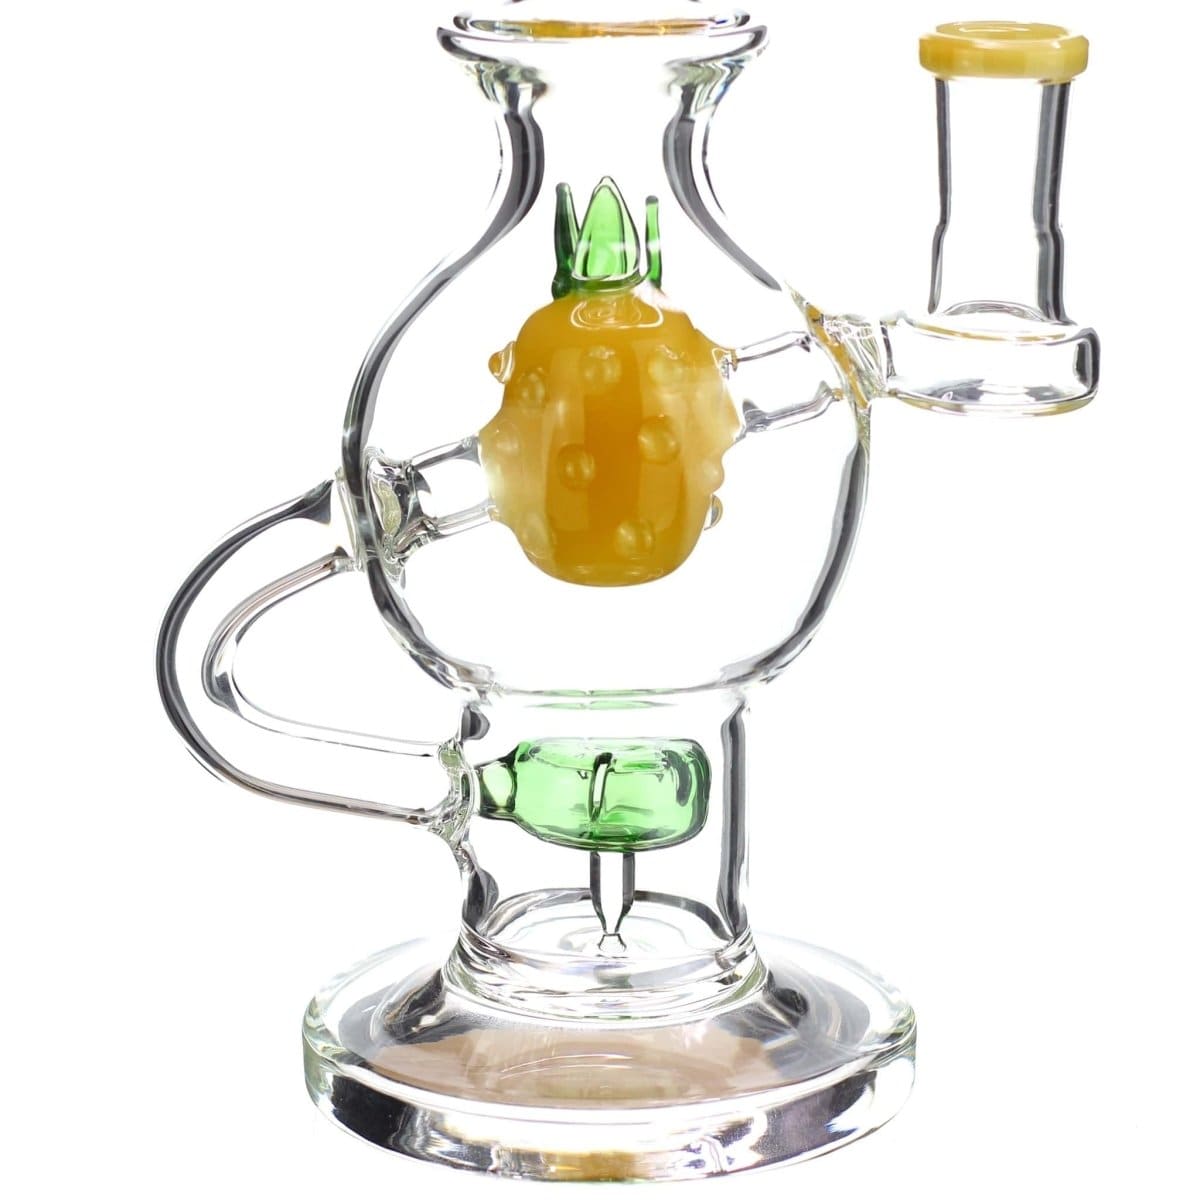 Benext Generation Glass Tropical Thunder Dome Dab Rig